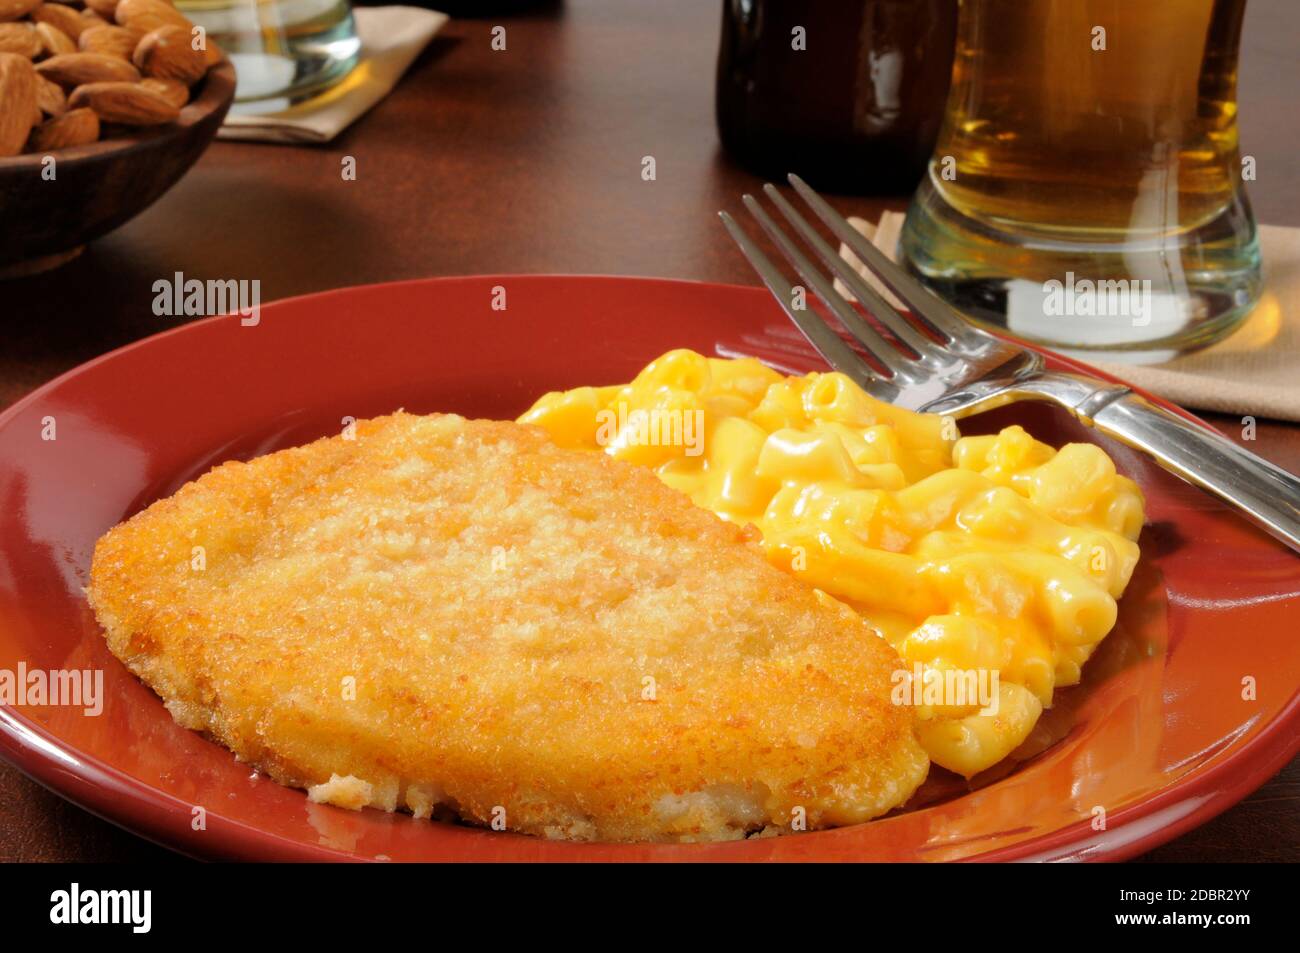 Breaded fish fillet with macaroni and cheese and beer on a bar counter Stock Photo